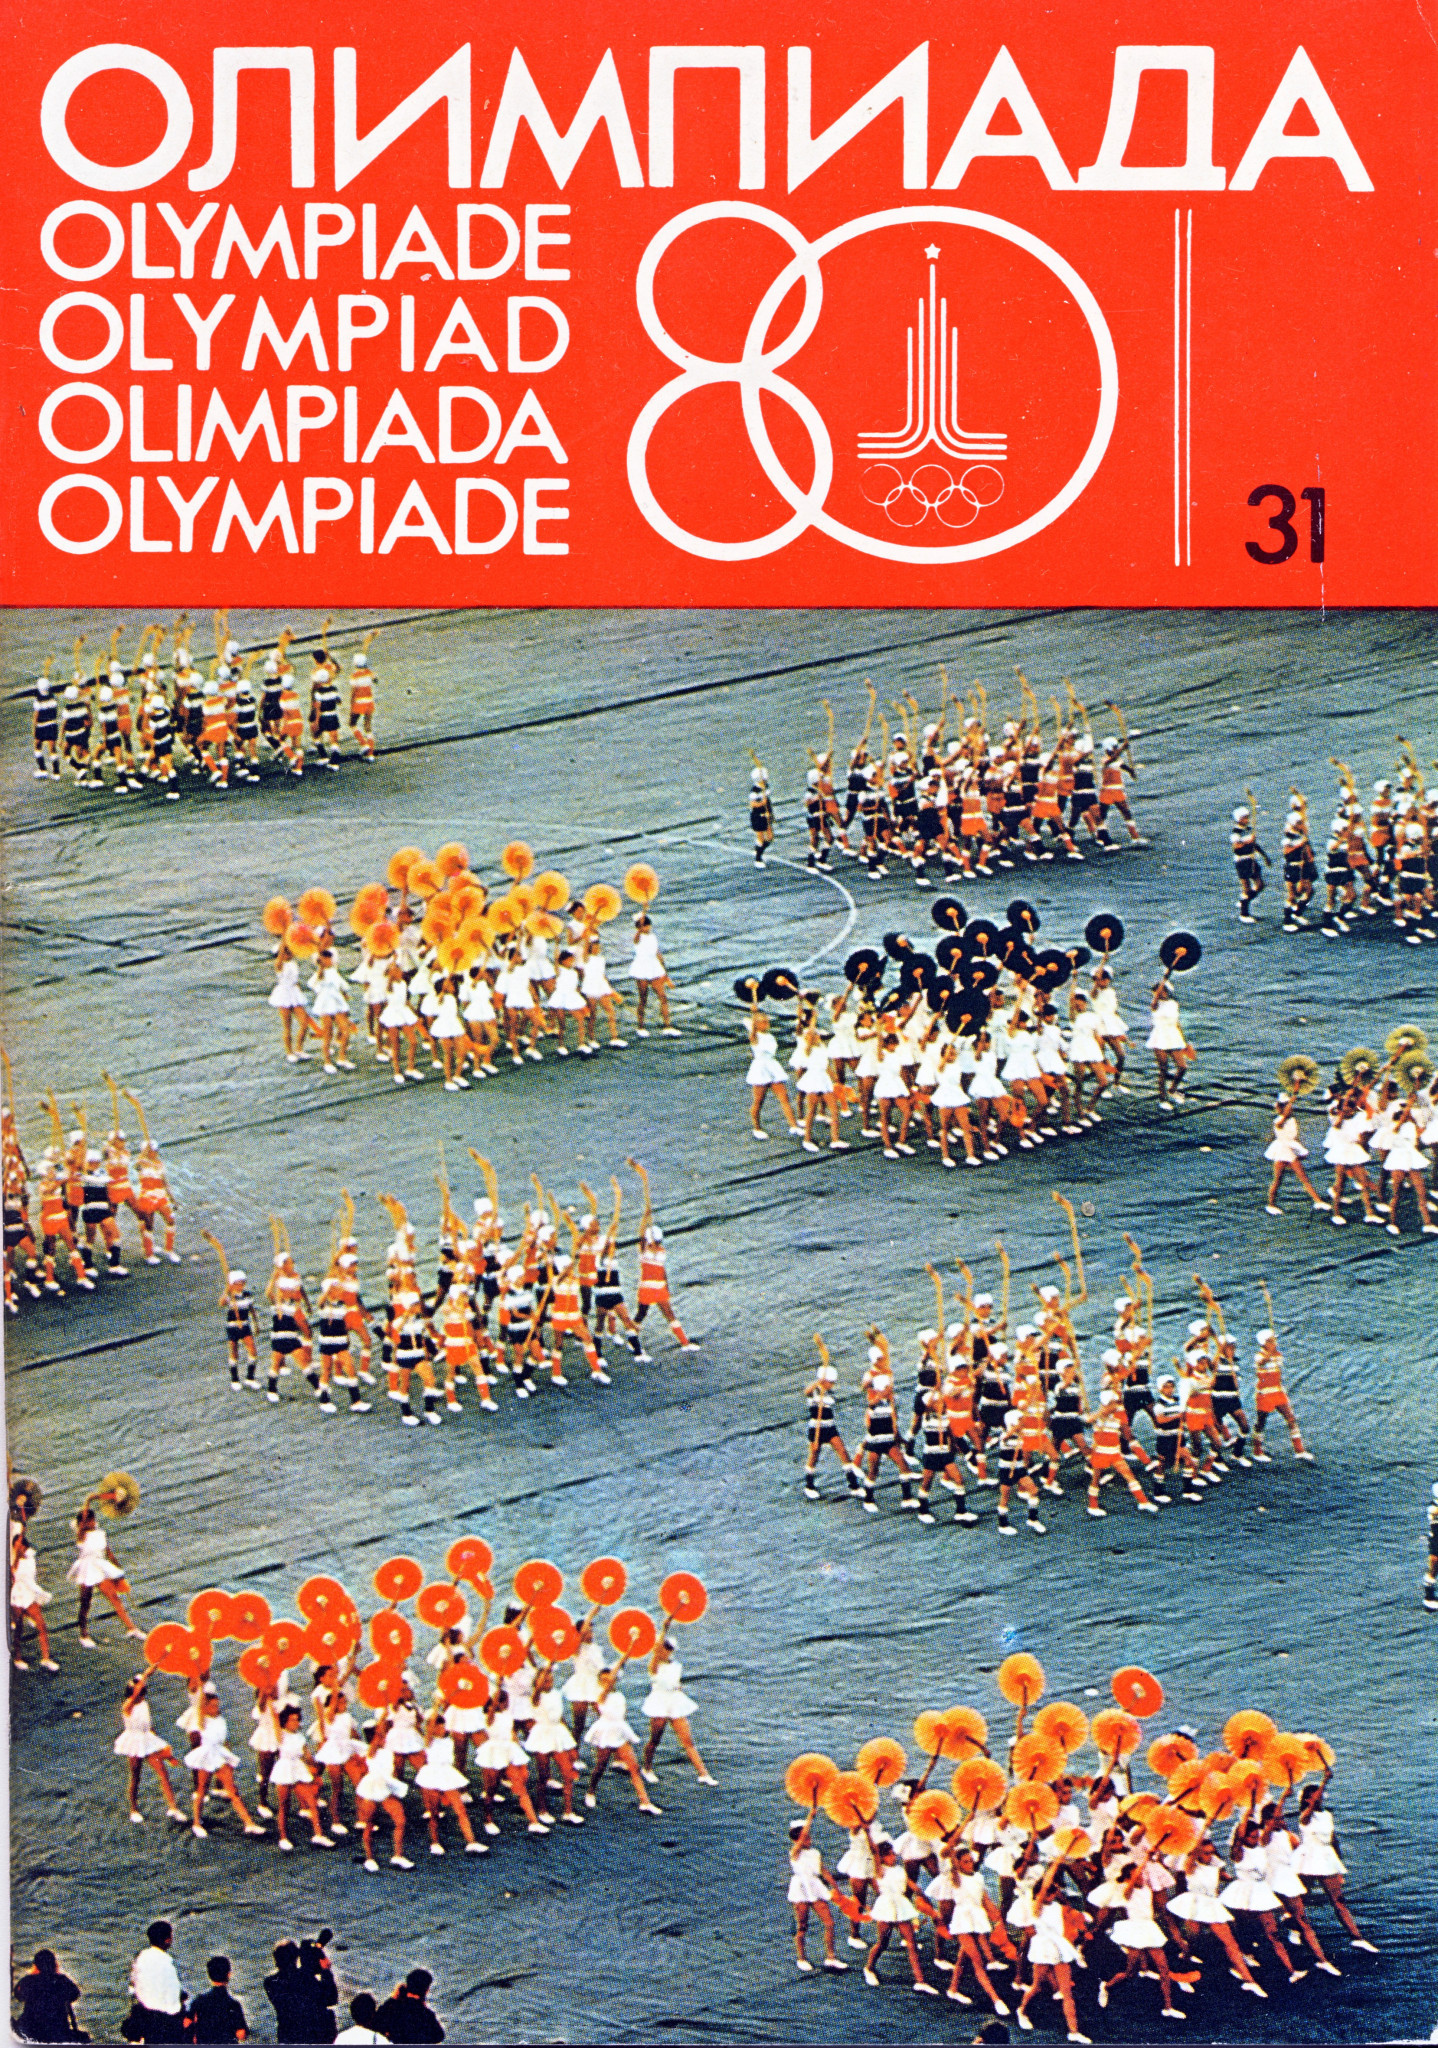 Organisers of the 1980 Moscow Olympics produced multi-lingual colour magazines to promote the Games ©Moscow80